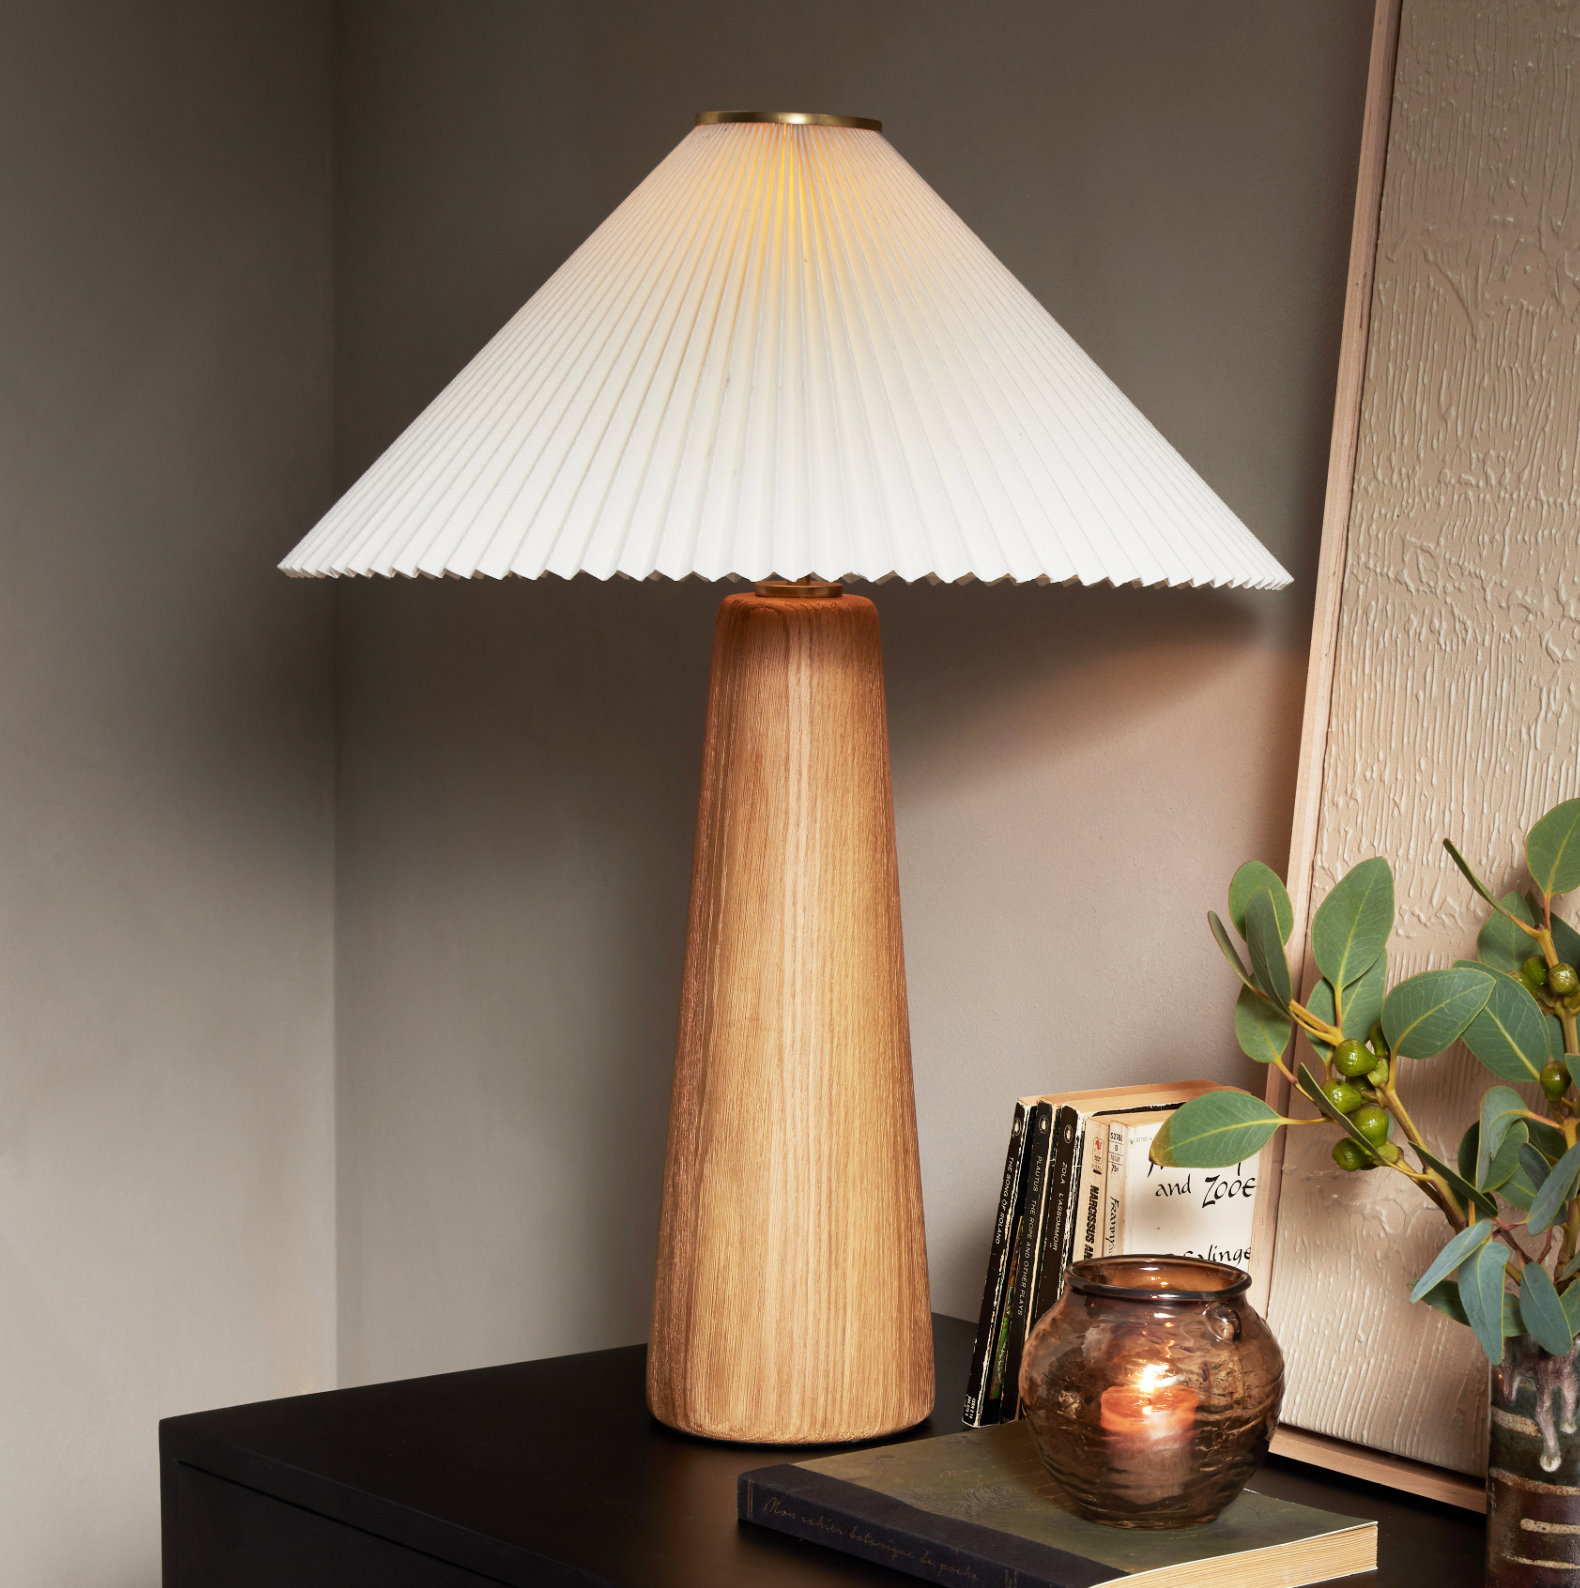 Modern minimal meets traditional. A tapered wood table lamp base is topped with a design-forward pleated shade. Amethyst Home provides interior design, new home construction design consulting, vintage area rugs, and lighting in the Kansas City metro area.